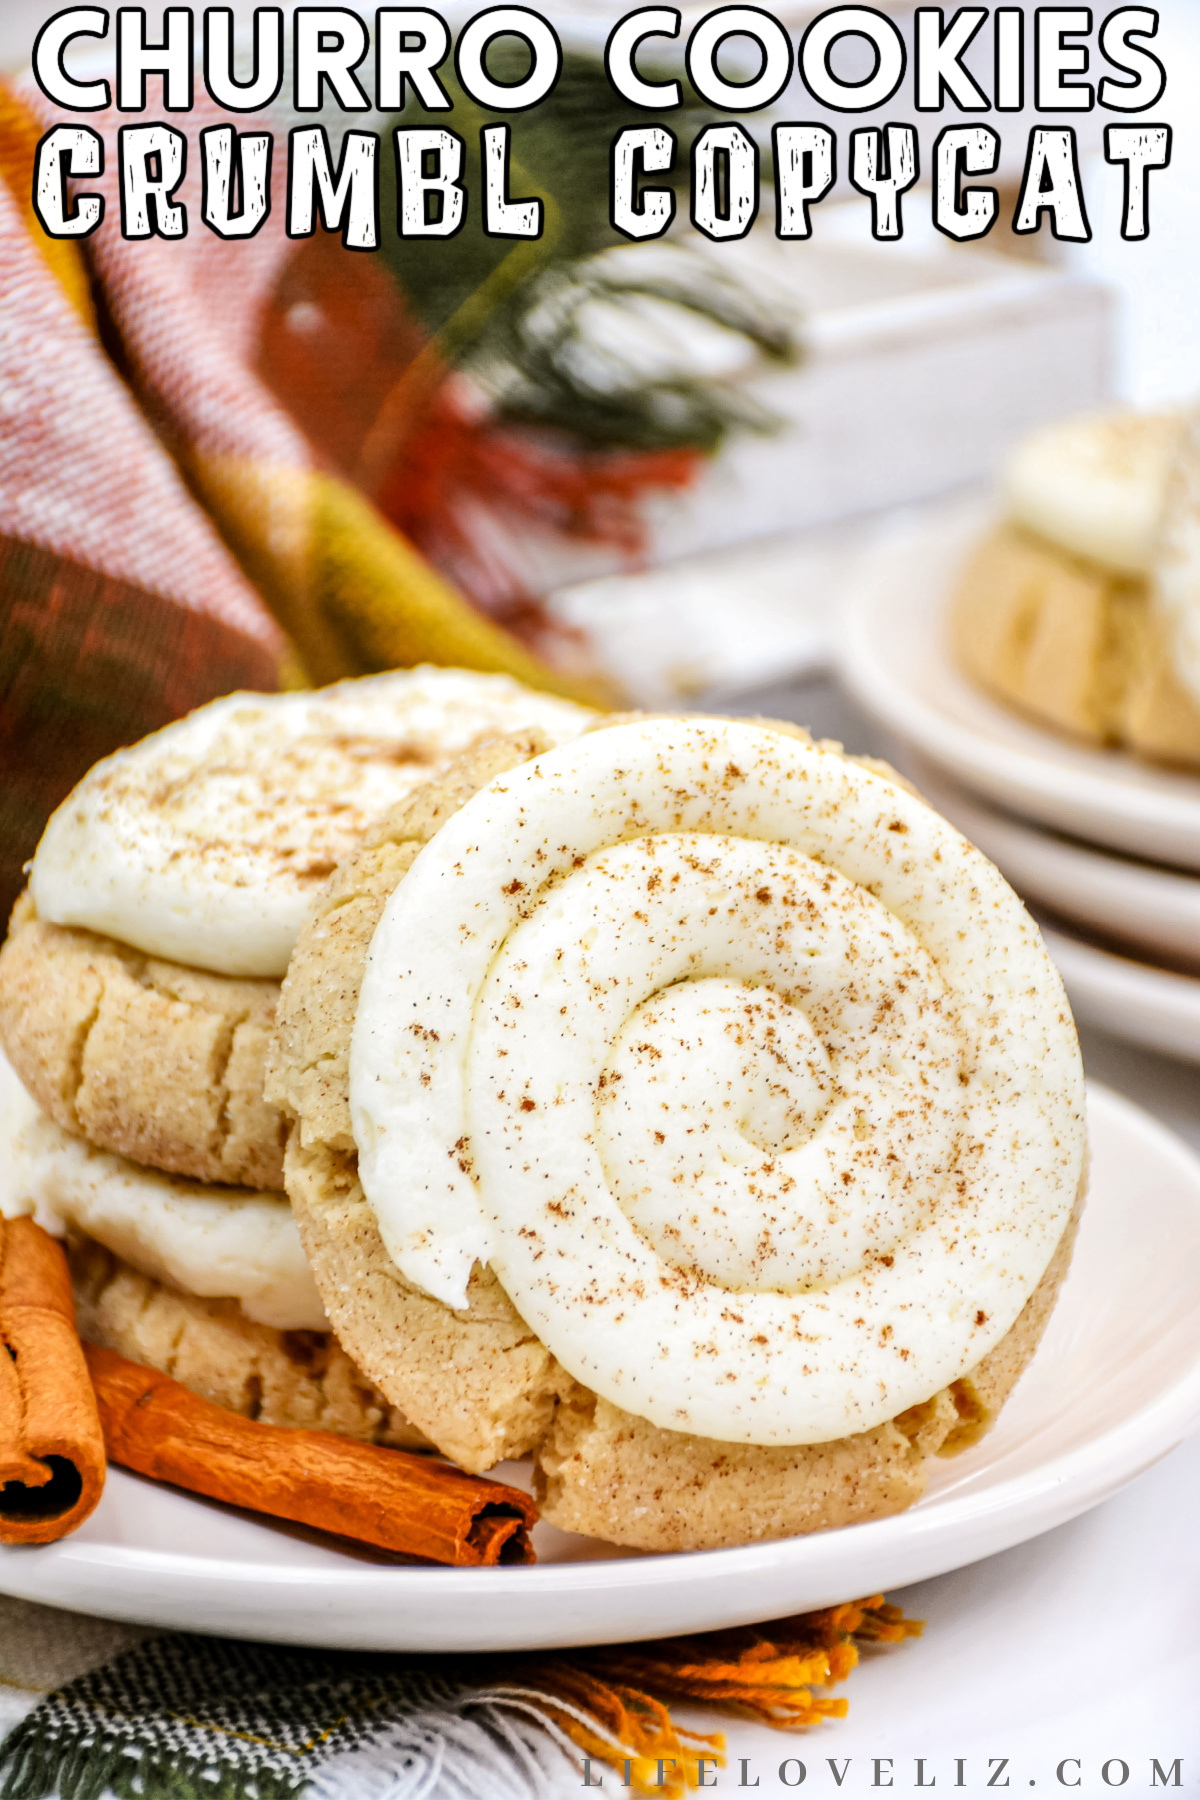 Learn how to make Crumbl Churro Cookies with our easy copycat recipe! These addictive cinnamon sugar cookies are tender with crisp edges.